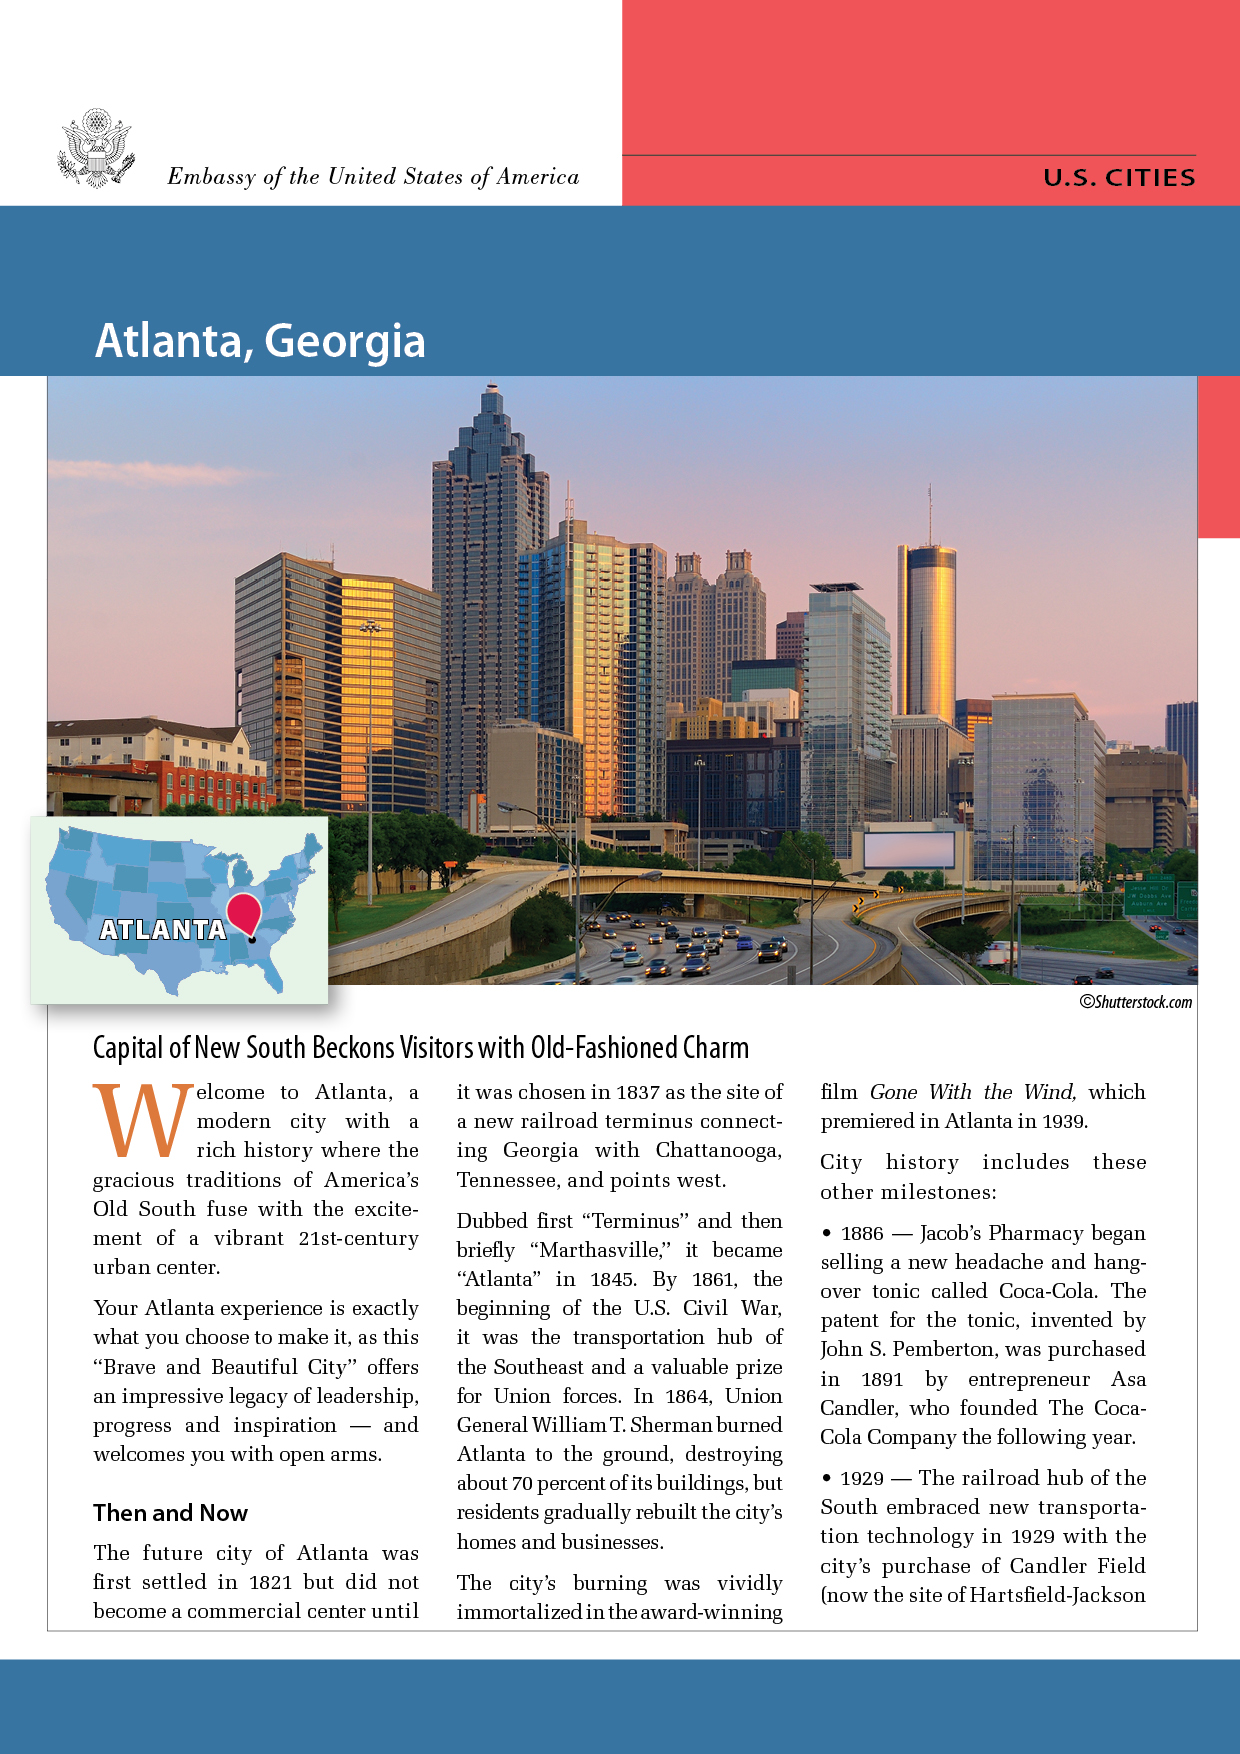 Atlanta, Georgia: Capital of New South Beckons Visitors with Old-Fashioned Charm